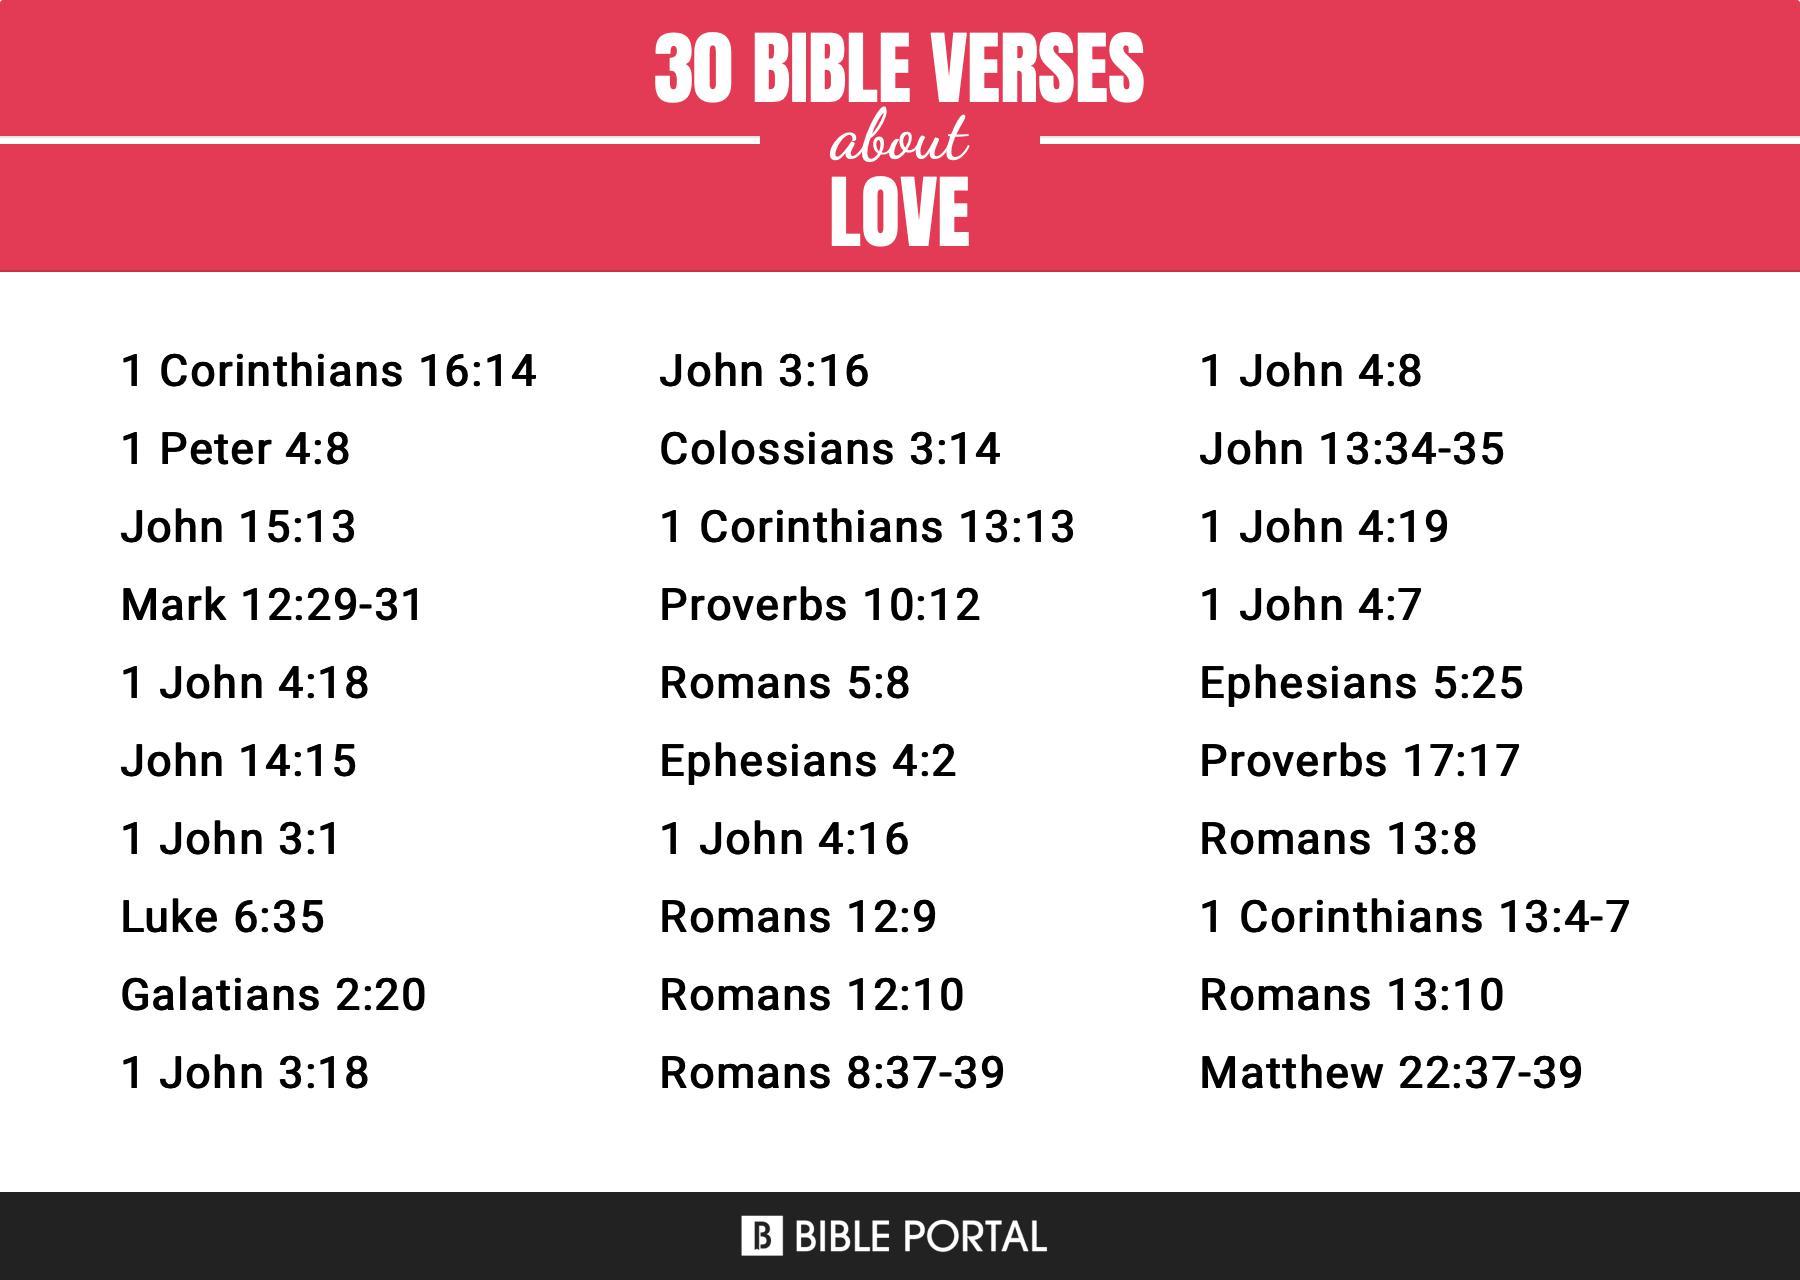 What Does the Bible Say about Love?